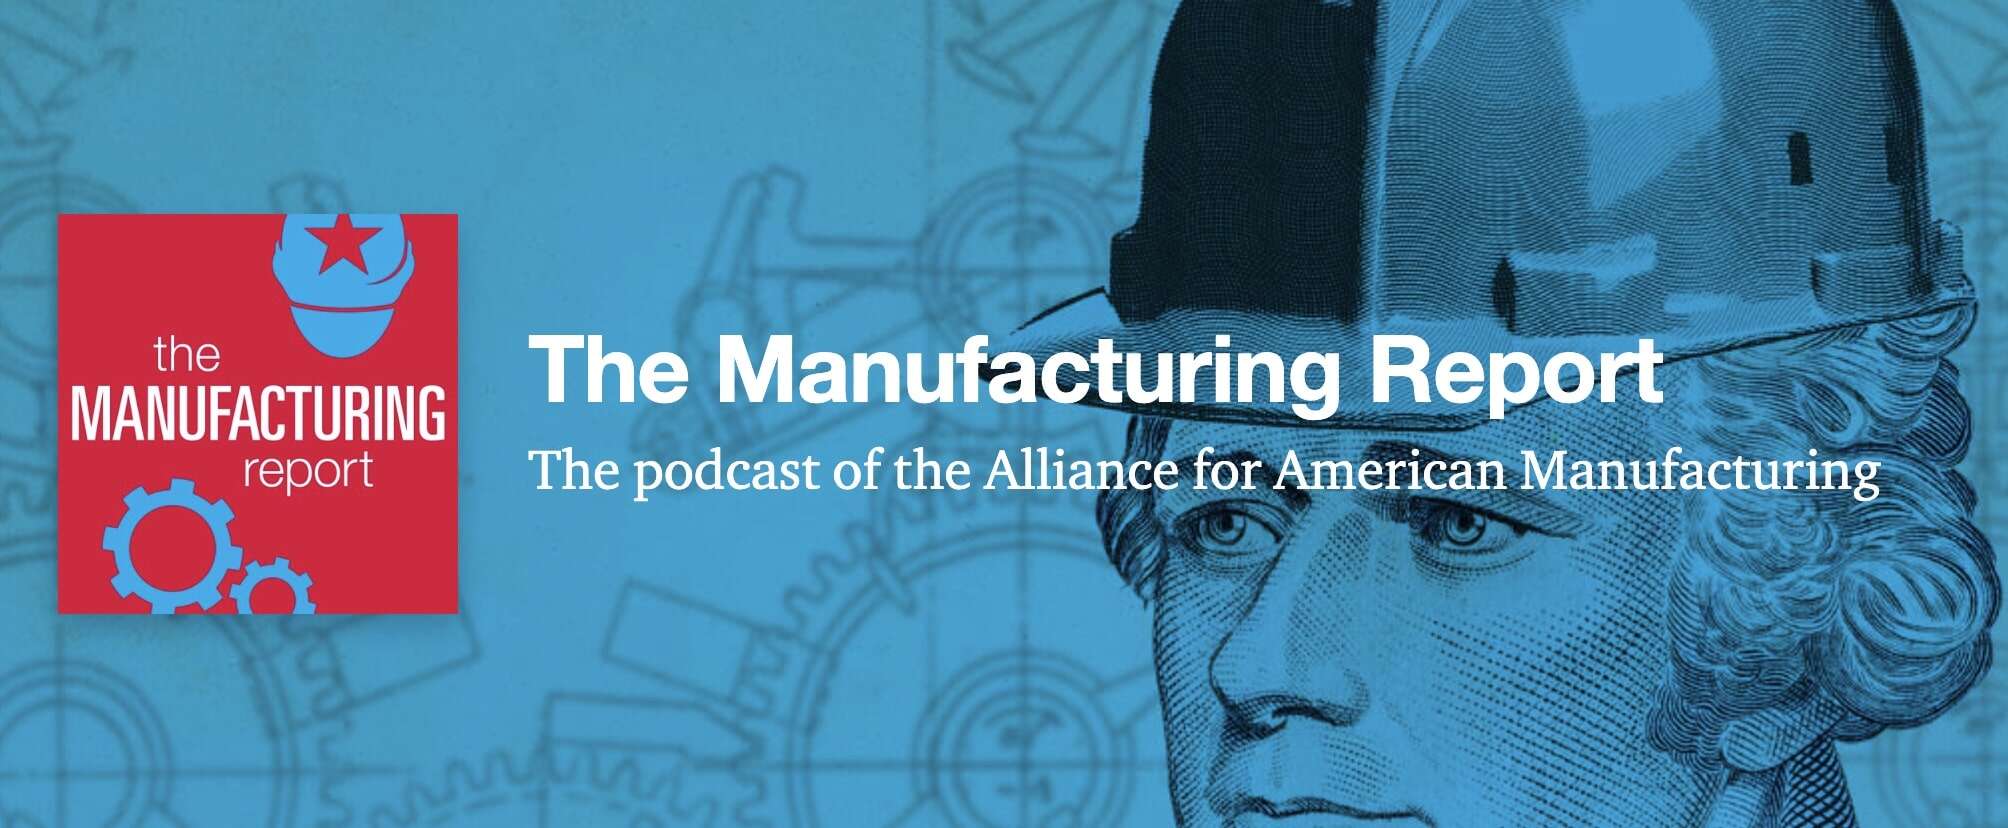 Listen Now to The Manufacturing Report brought to you by the Alliance for American Manufacturing